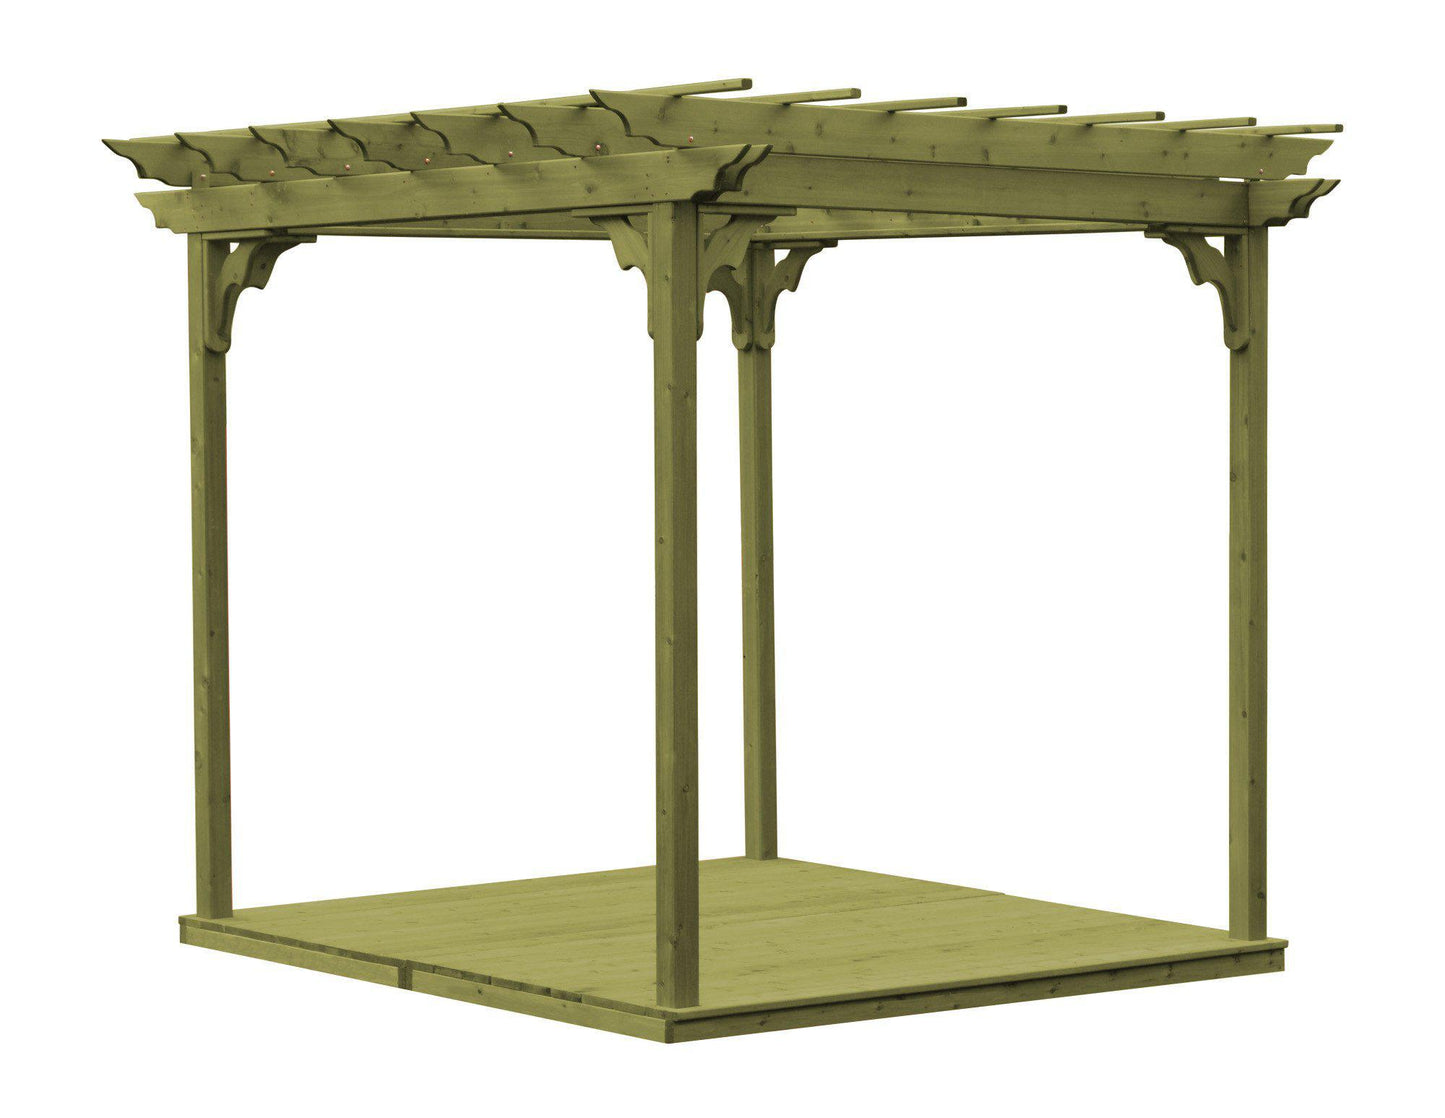 A&L FURNITURE CO. Western Red Cedar 8'x10' Pergola w/Deck & Swing Hangers (THIS ITEM HAS BEEN DISCONTINUED) - LEAD TIME TO SHIP 2 WEEKS